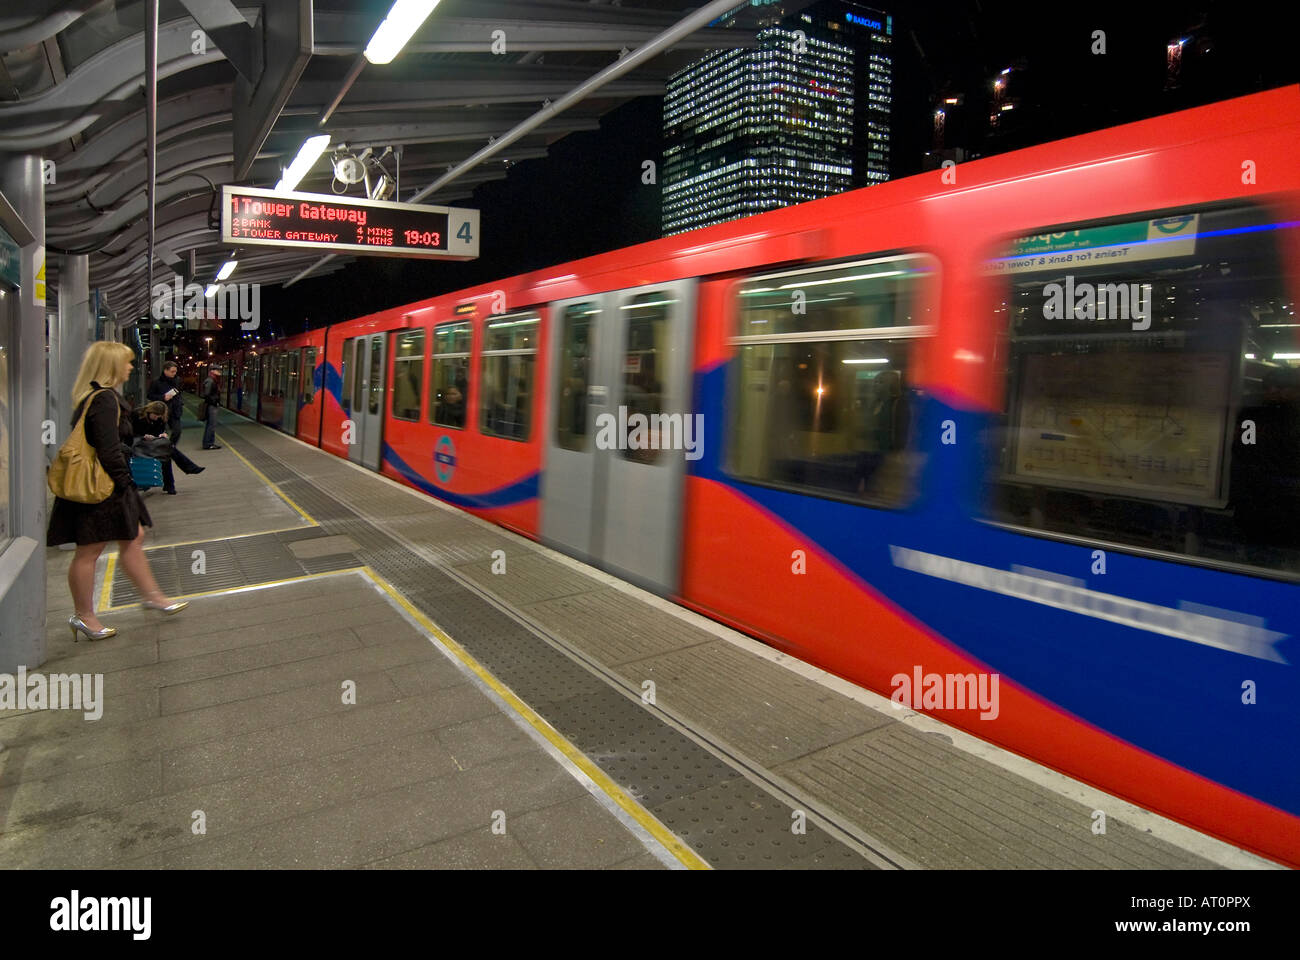 Horizontal wide angle of a Docklands Light Railway train arriving at Poplar station with people waiting on the platform at night Stock Photo